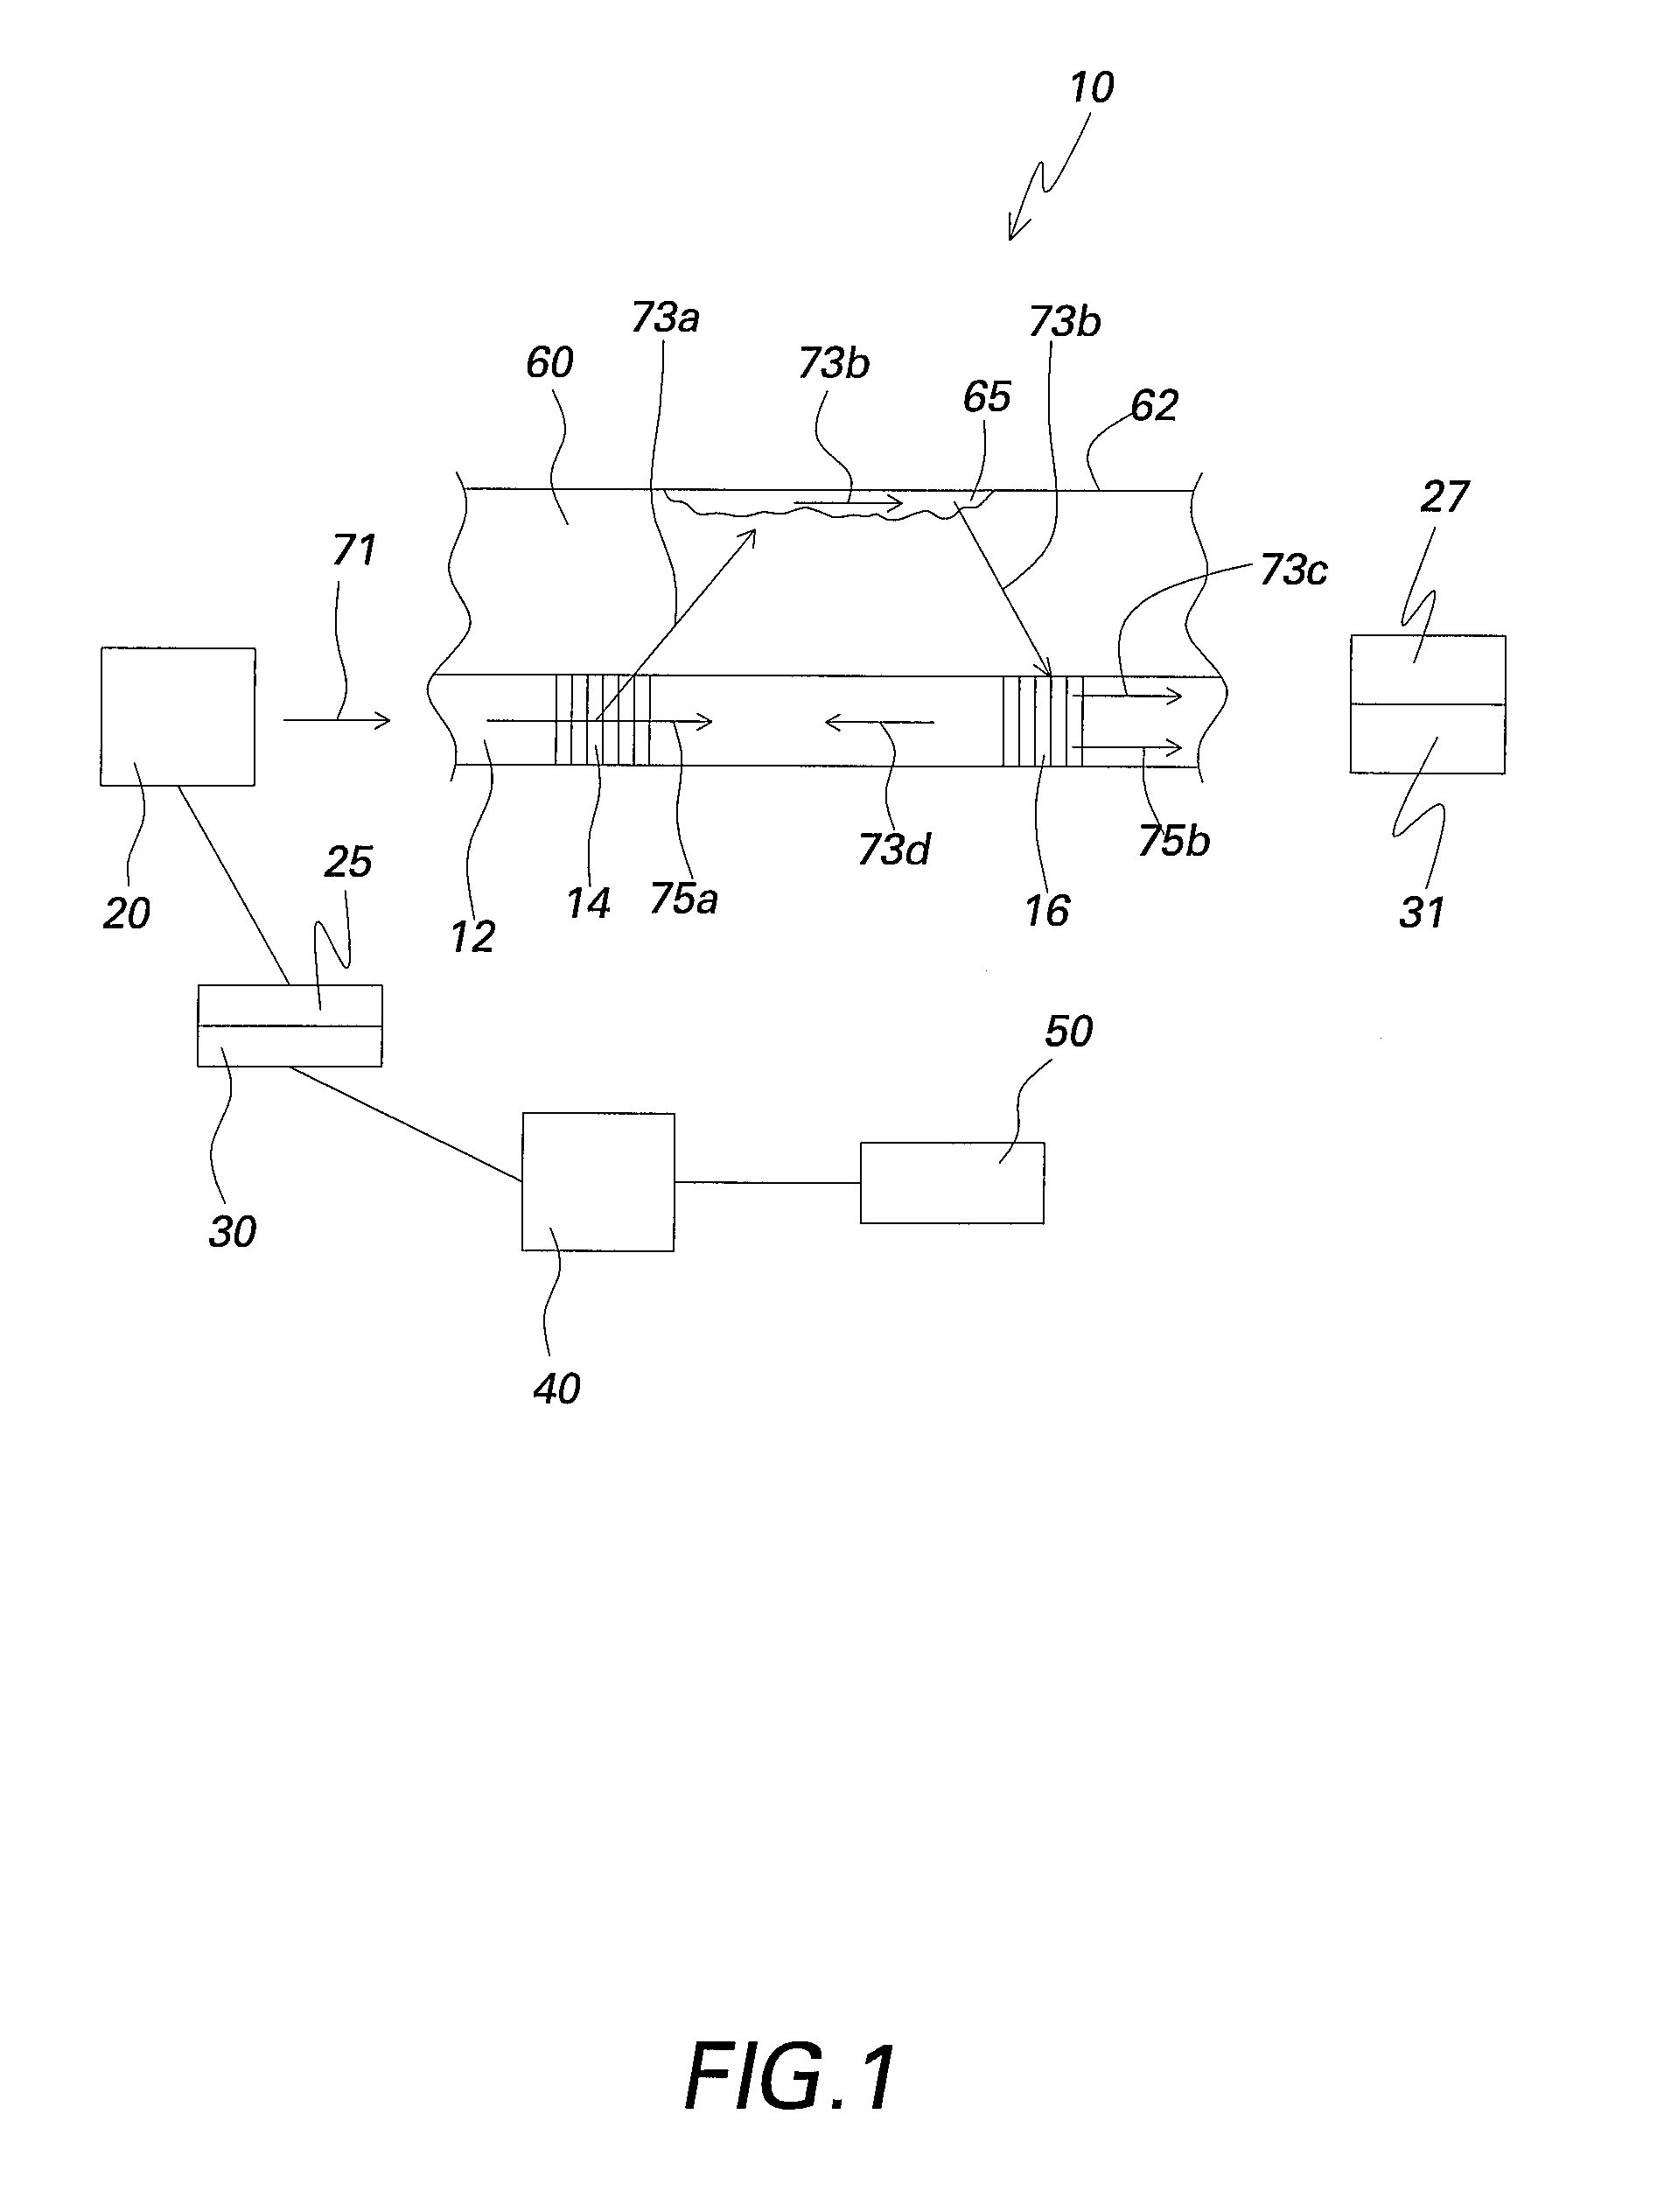 Interferometer-based real time early fouling detection system and method